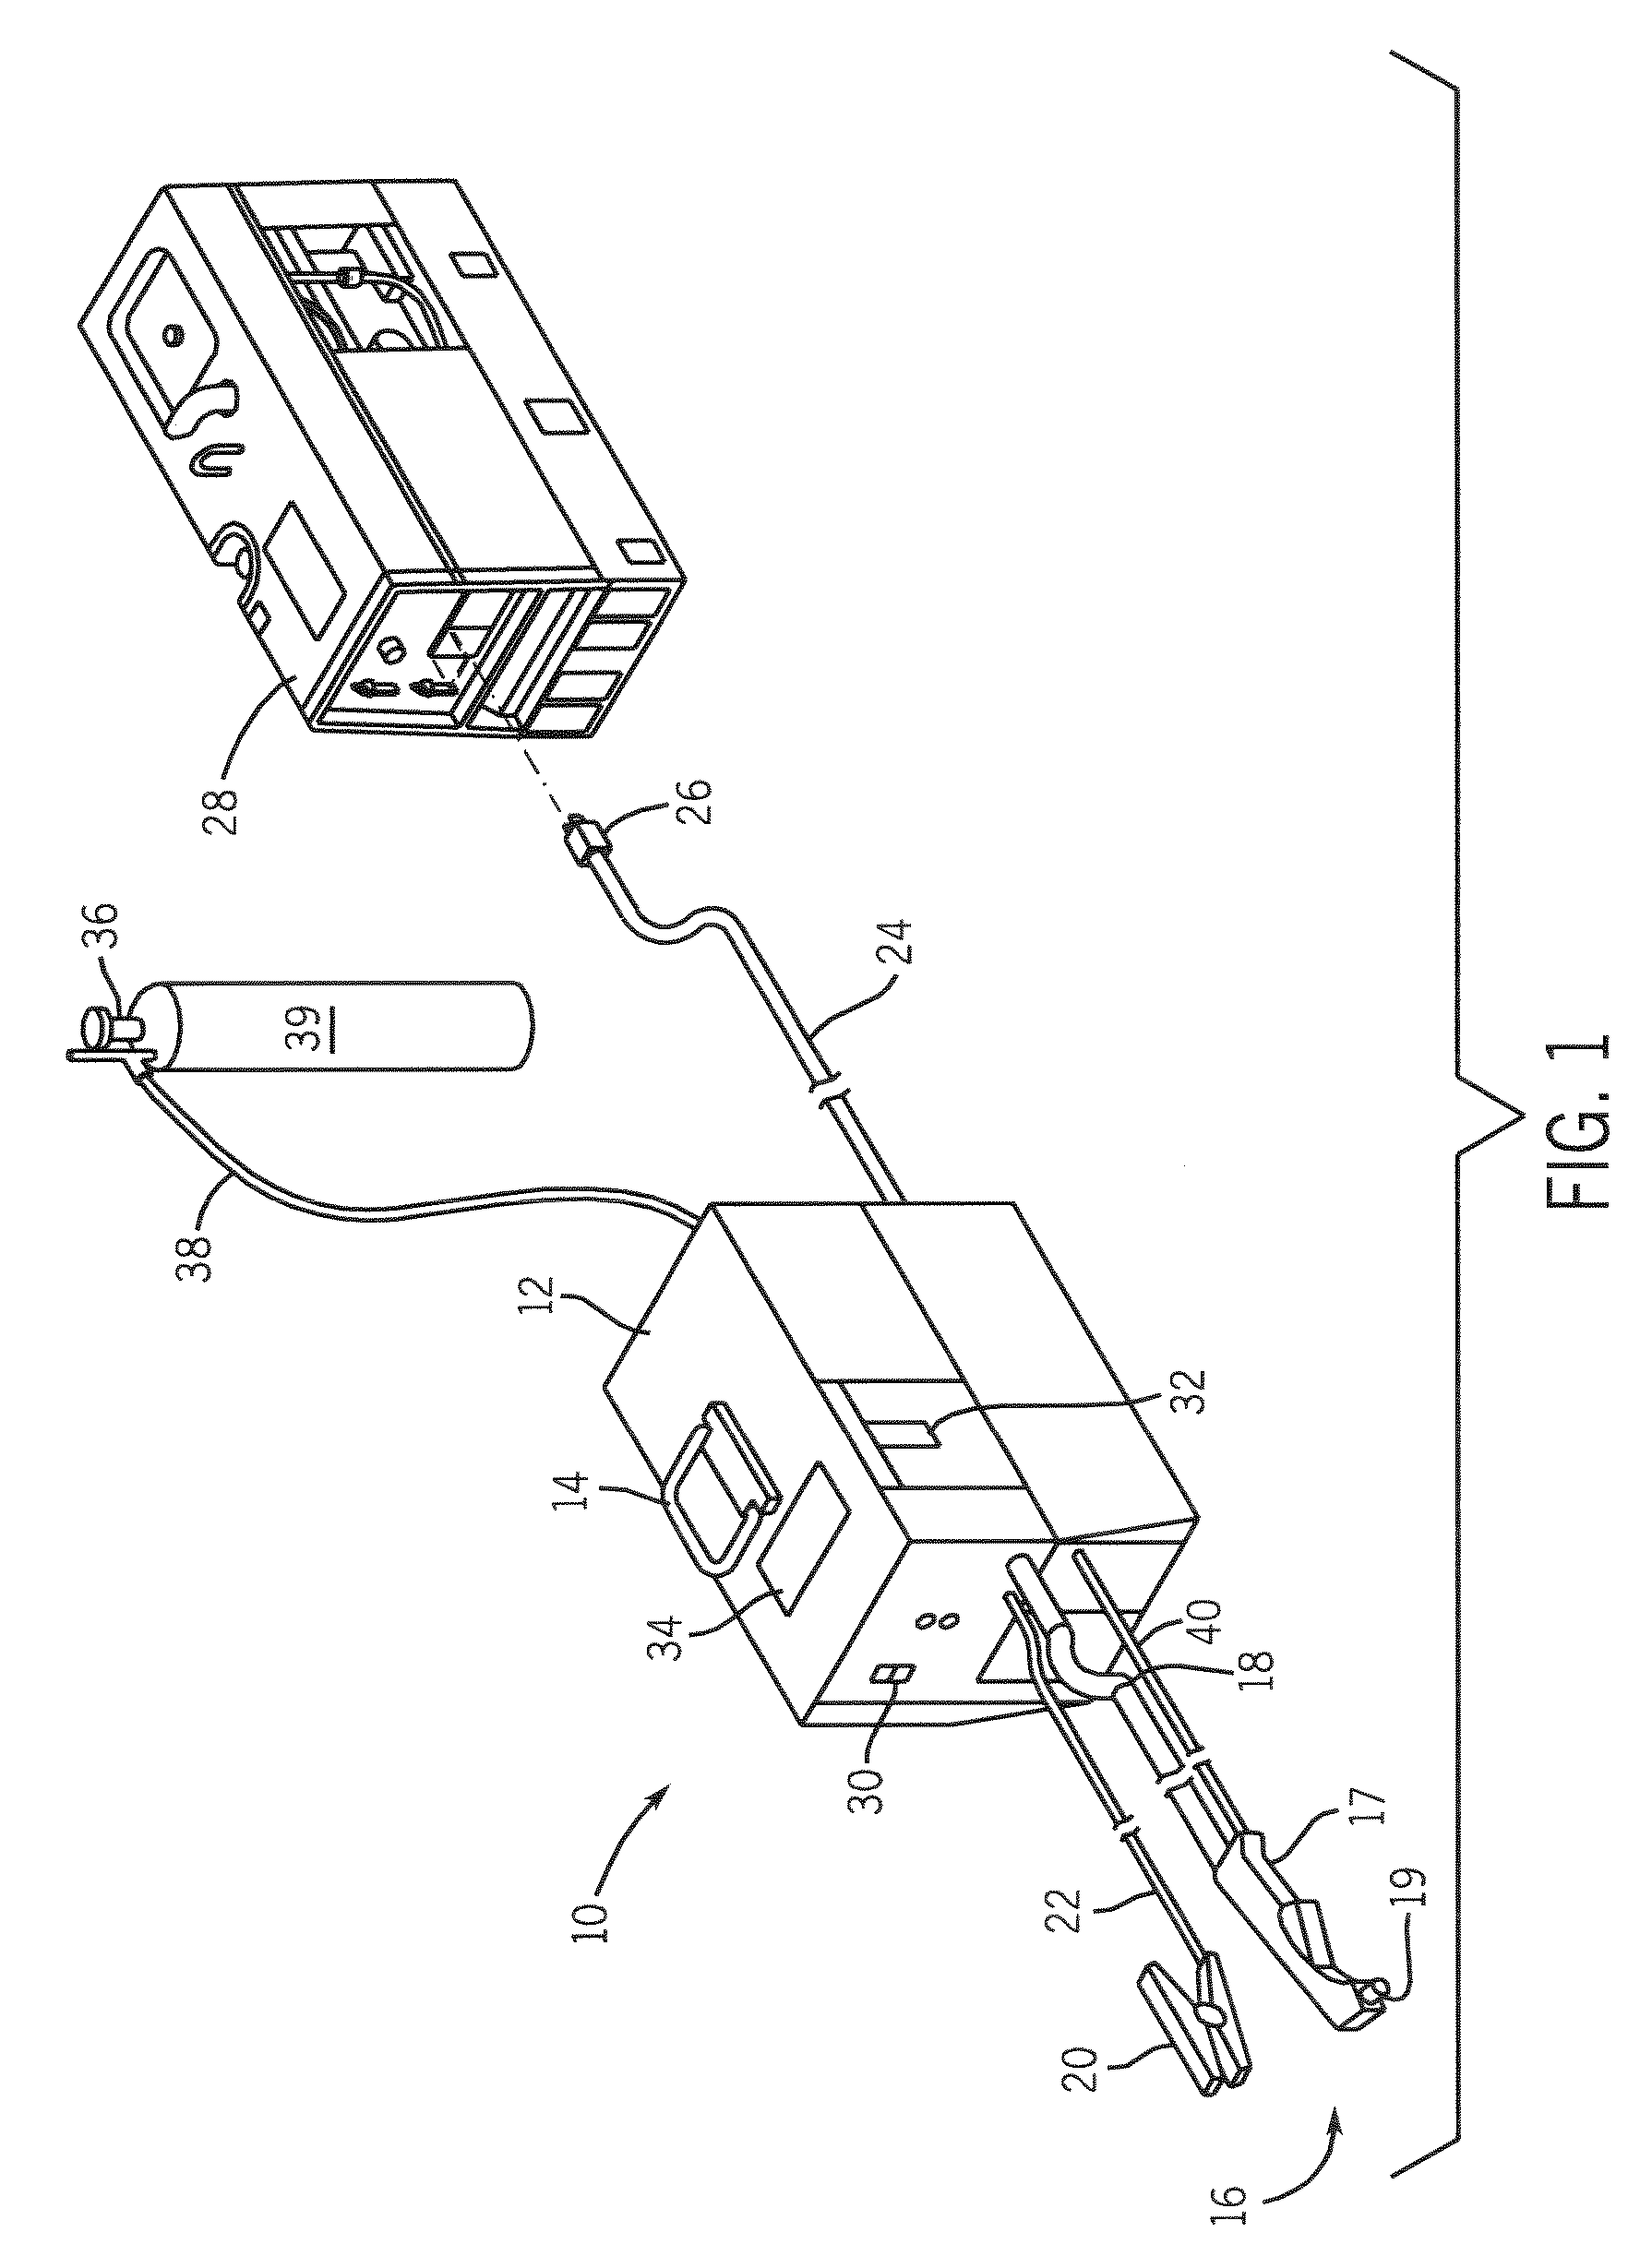 Method and apparatus for localized control of a plasma cutter